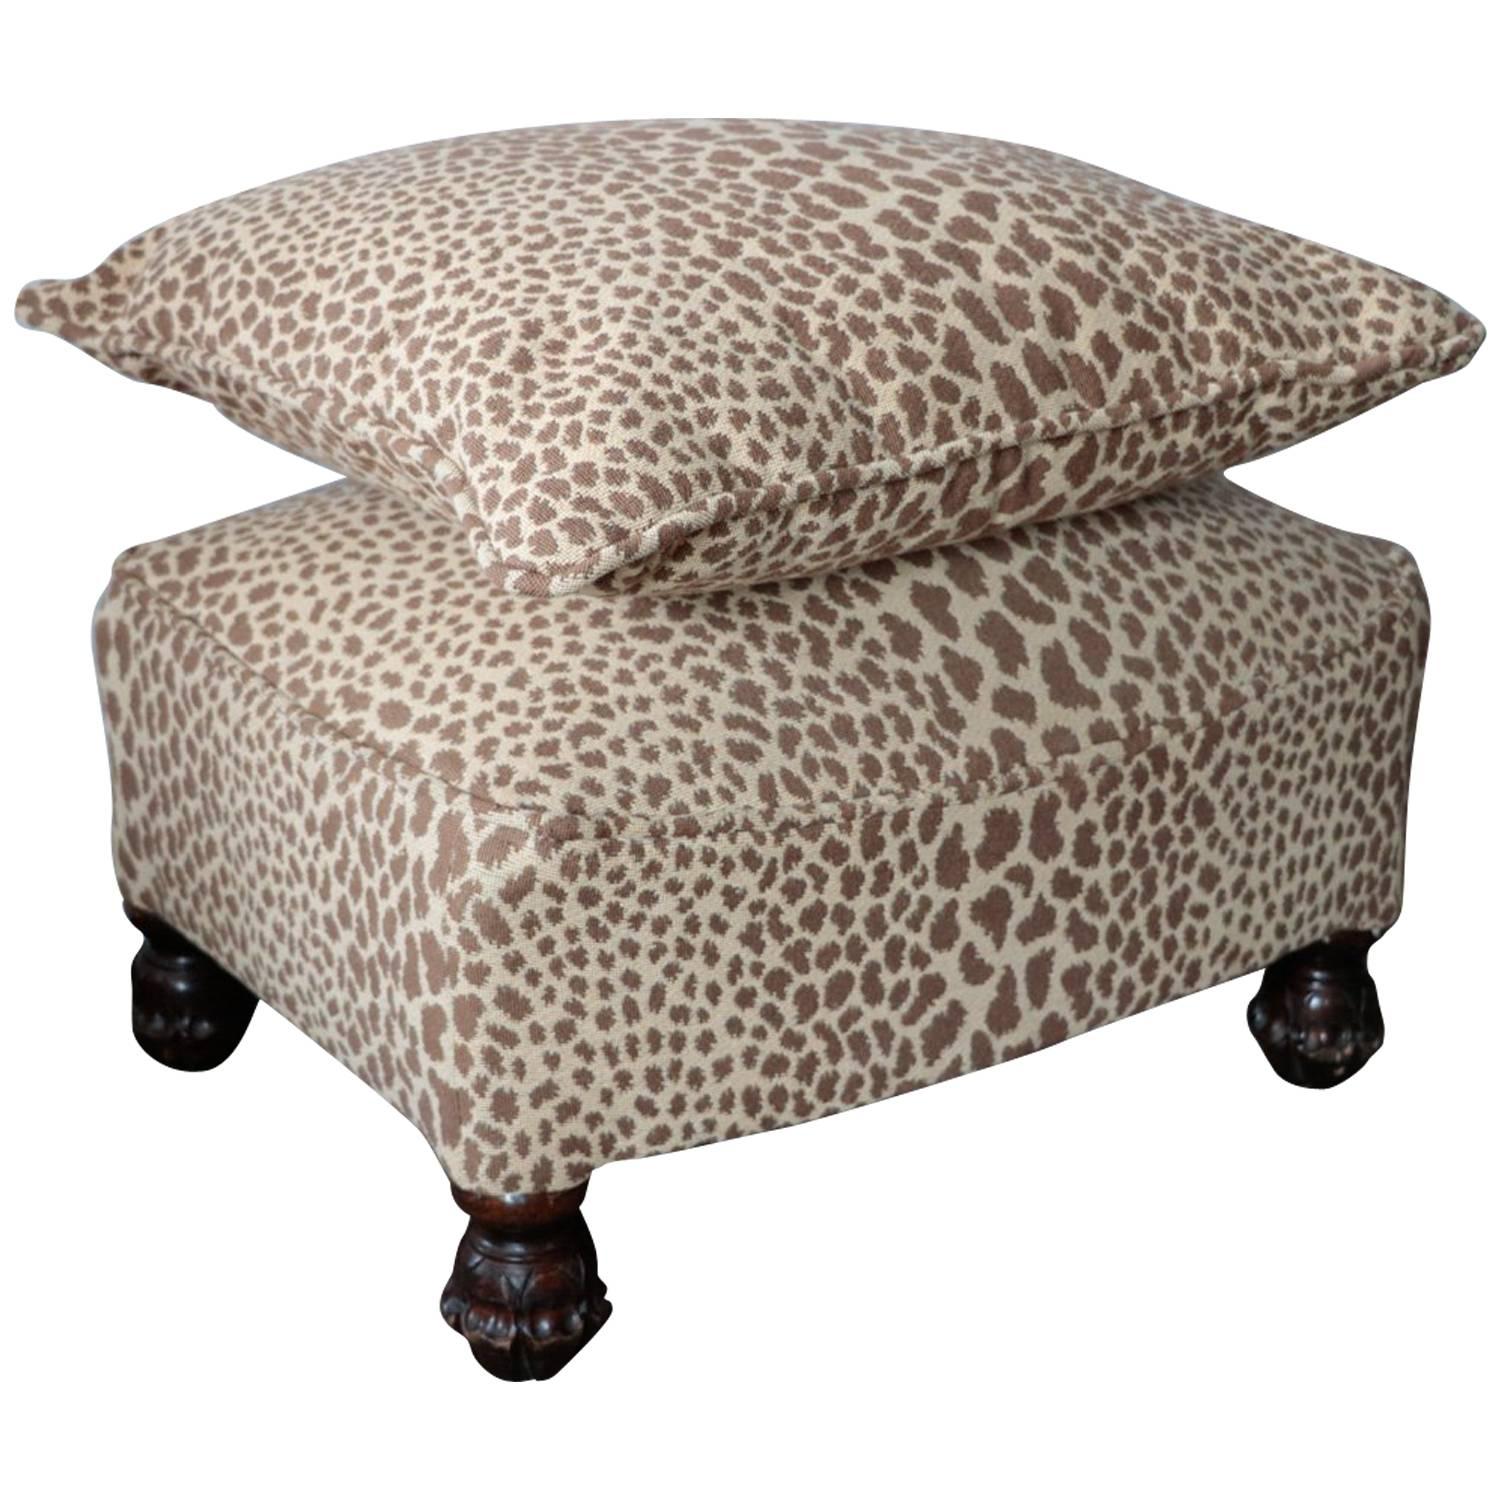 ON SALE NOW!  Hot to Trot 1950 Mid Mod Cheetah Ottoman 